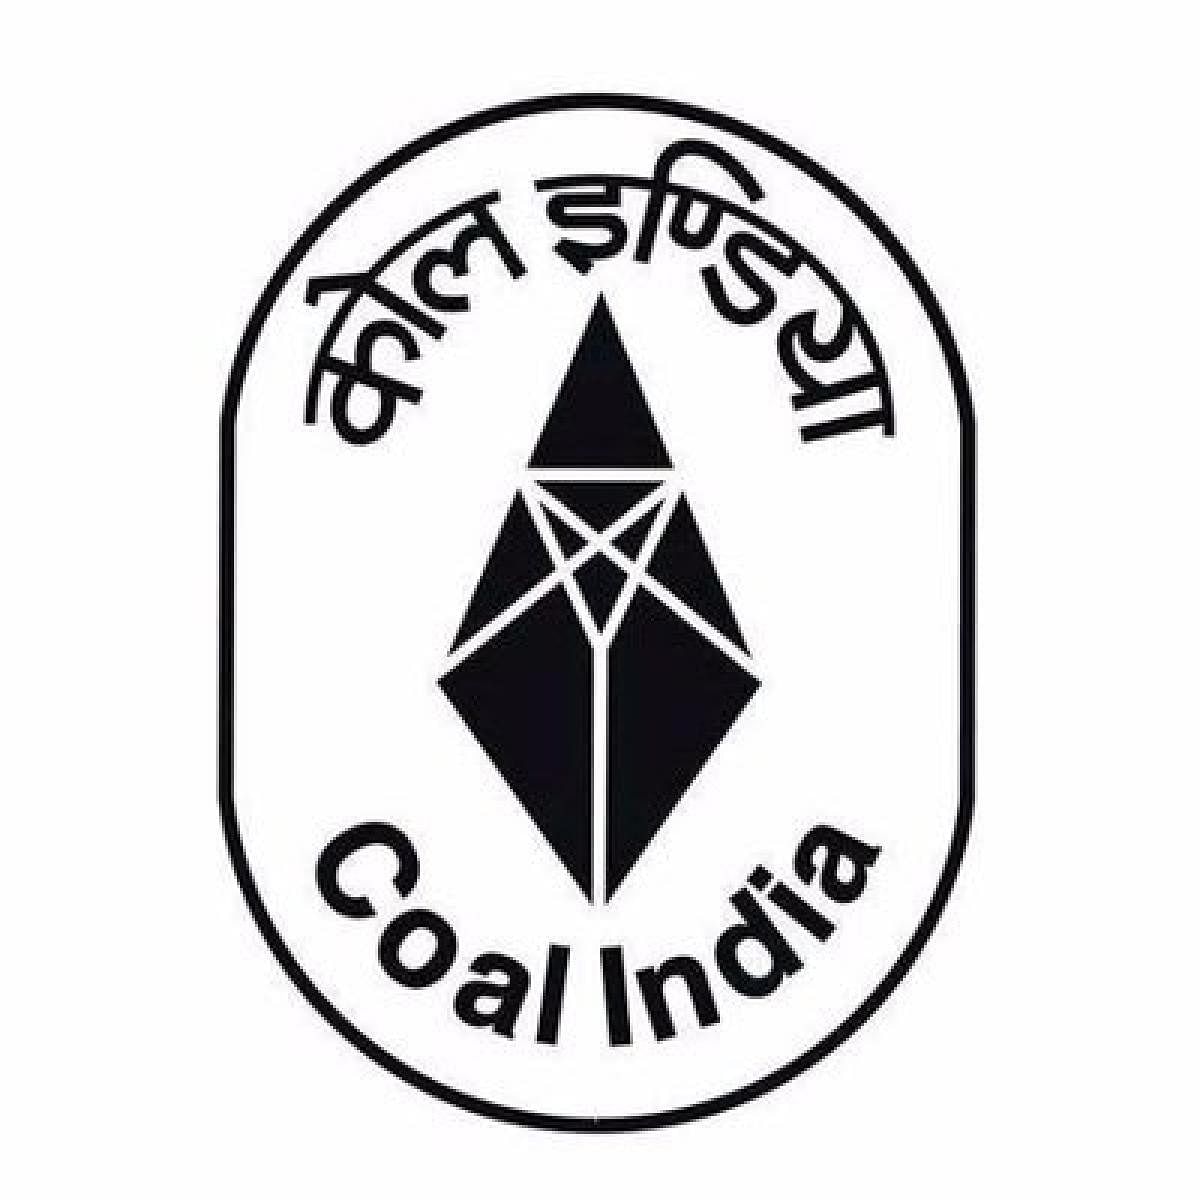 Coal India output declines 11% to 40 million tonnes in April